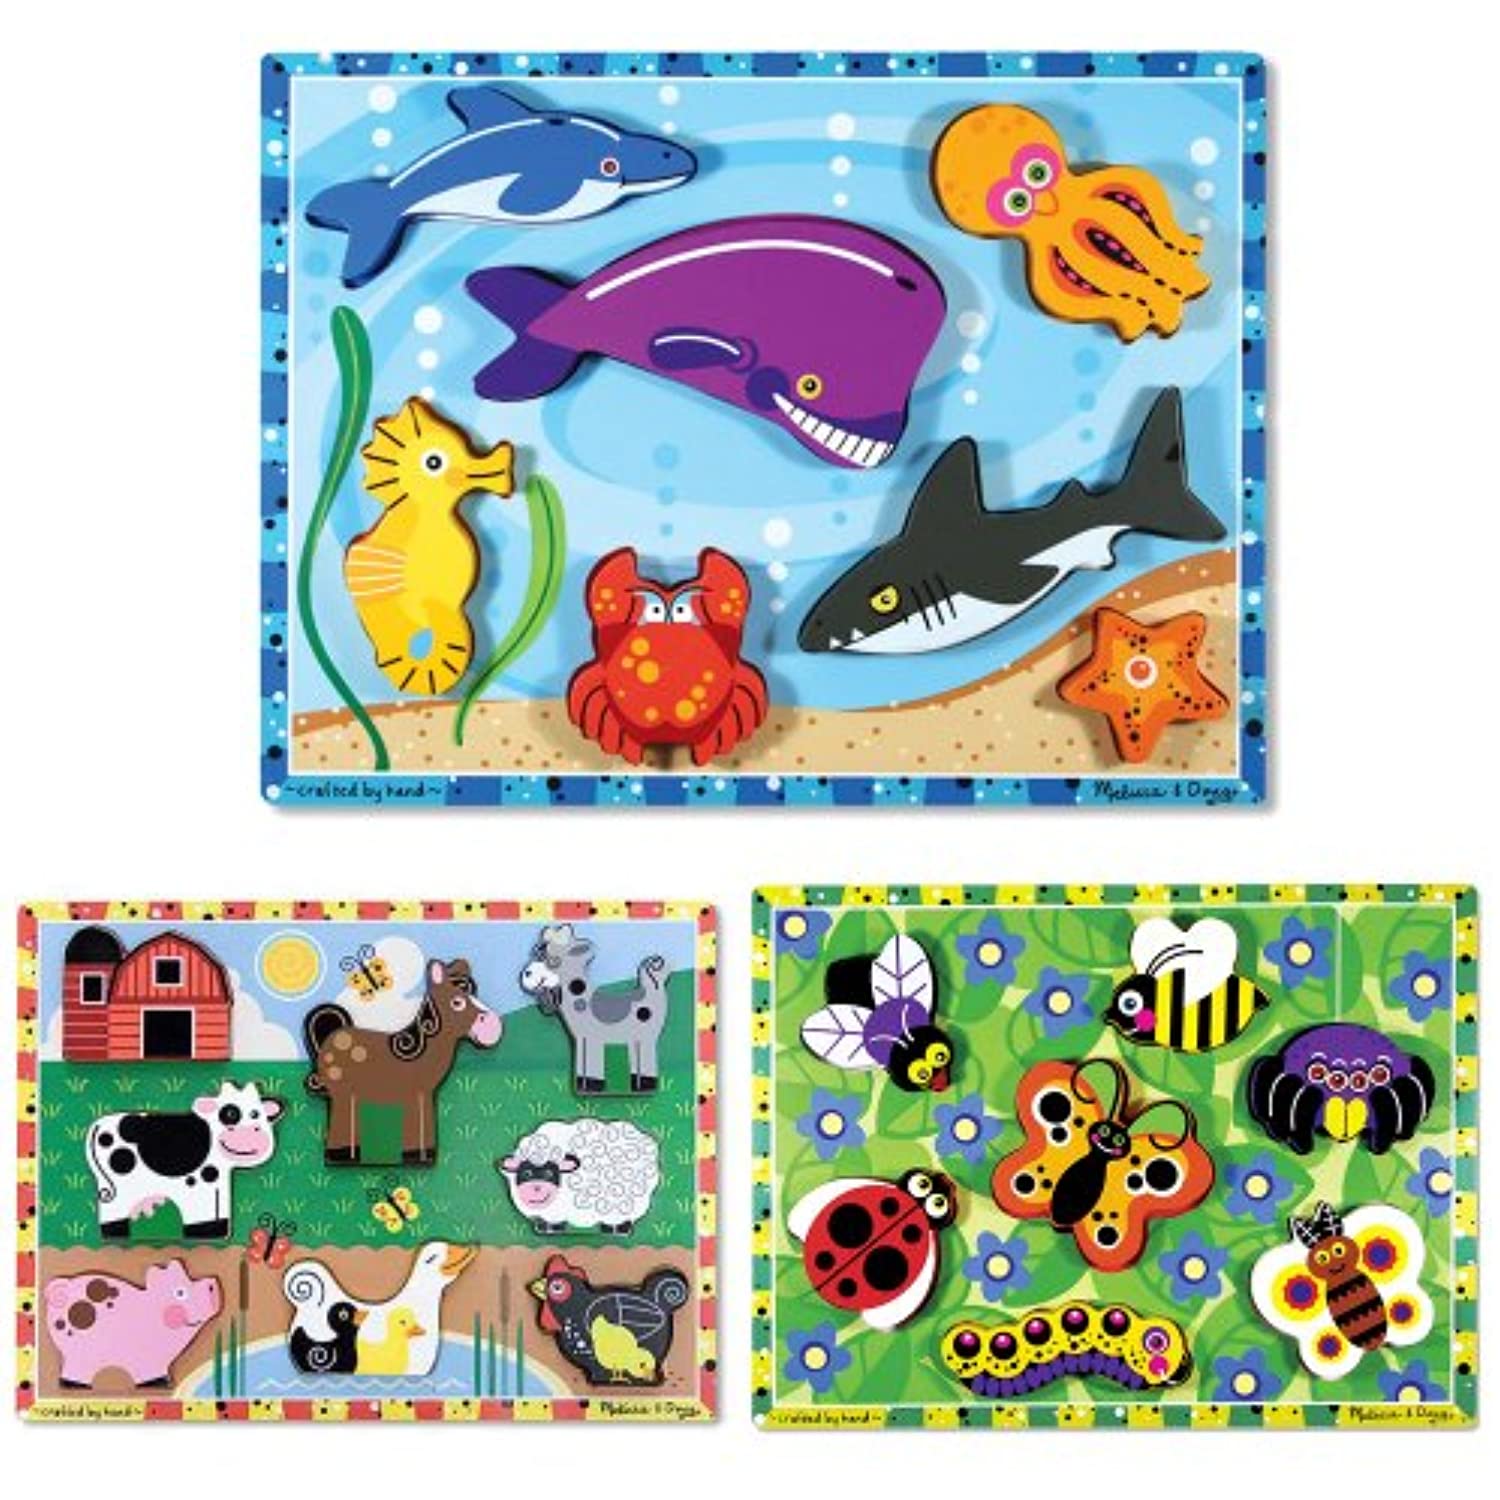 Melissa & Doug Sea Life, Farm, and Insects Wooden Chunky Puzzle Bundle (Set of 3)